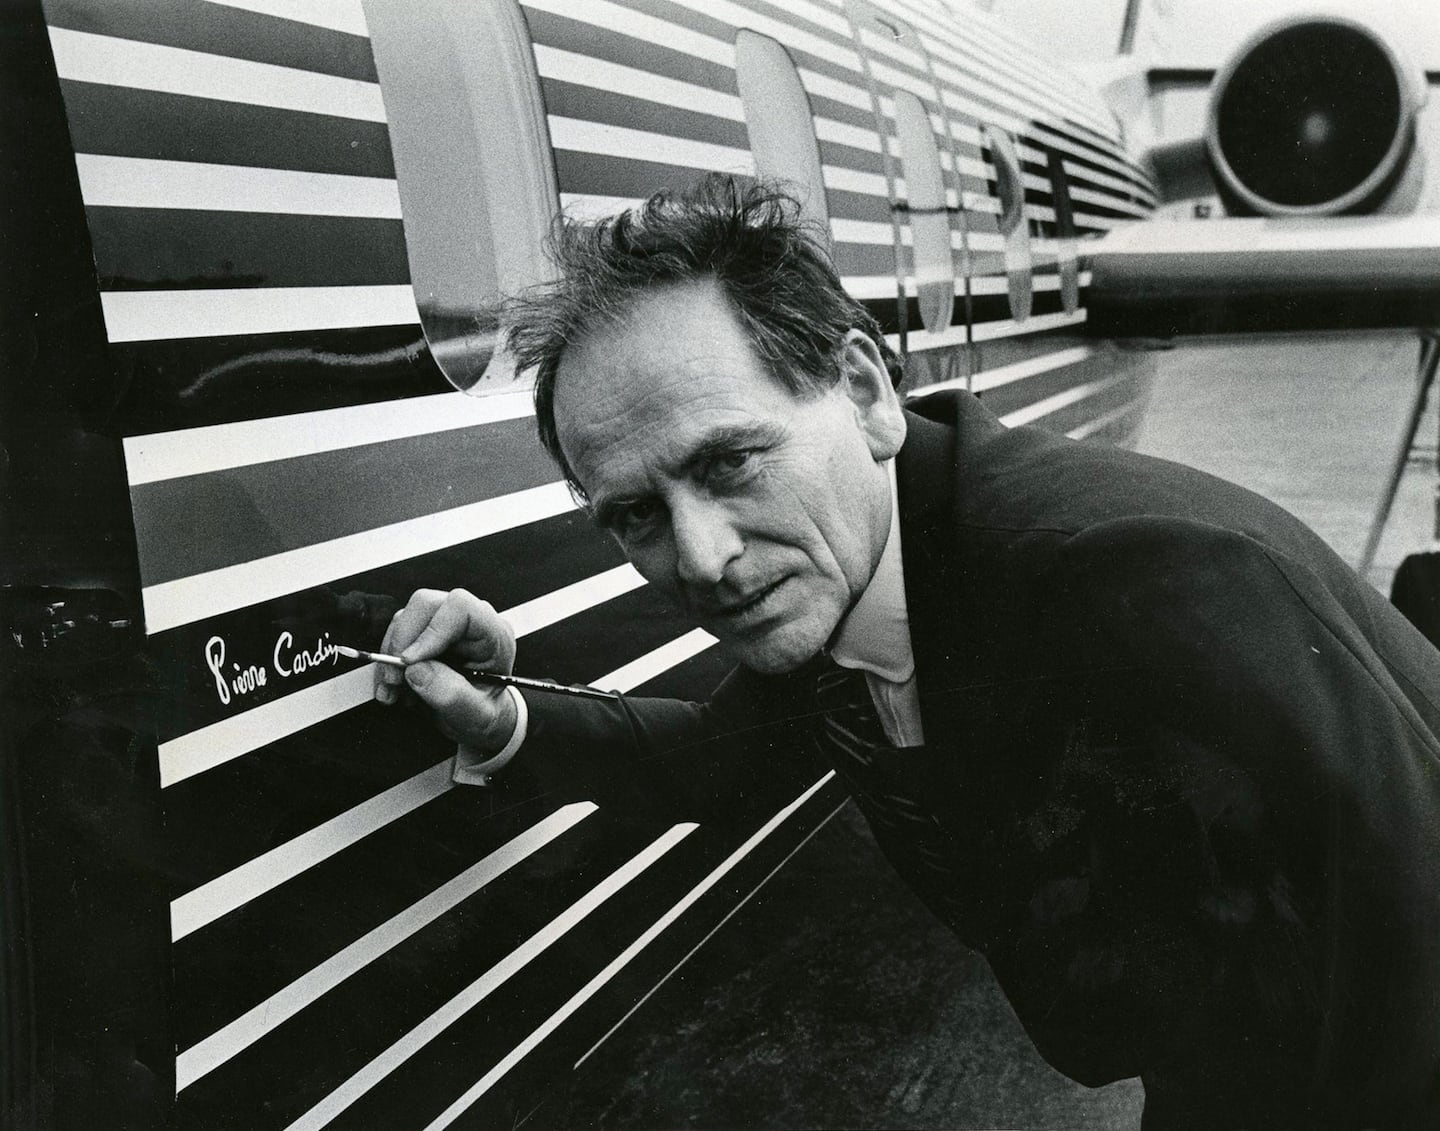 Italian-born French fashion designer Pierre Cardin signs his name on the outside of his plane in Washington, DC on September 11, 1978. Ellsworth Davis for the Washington Post. Getty Images.